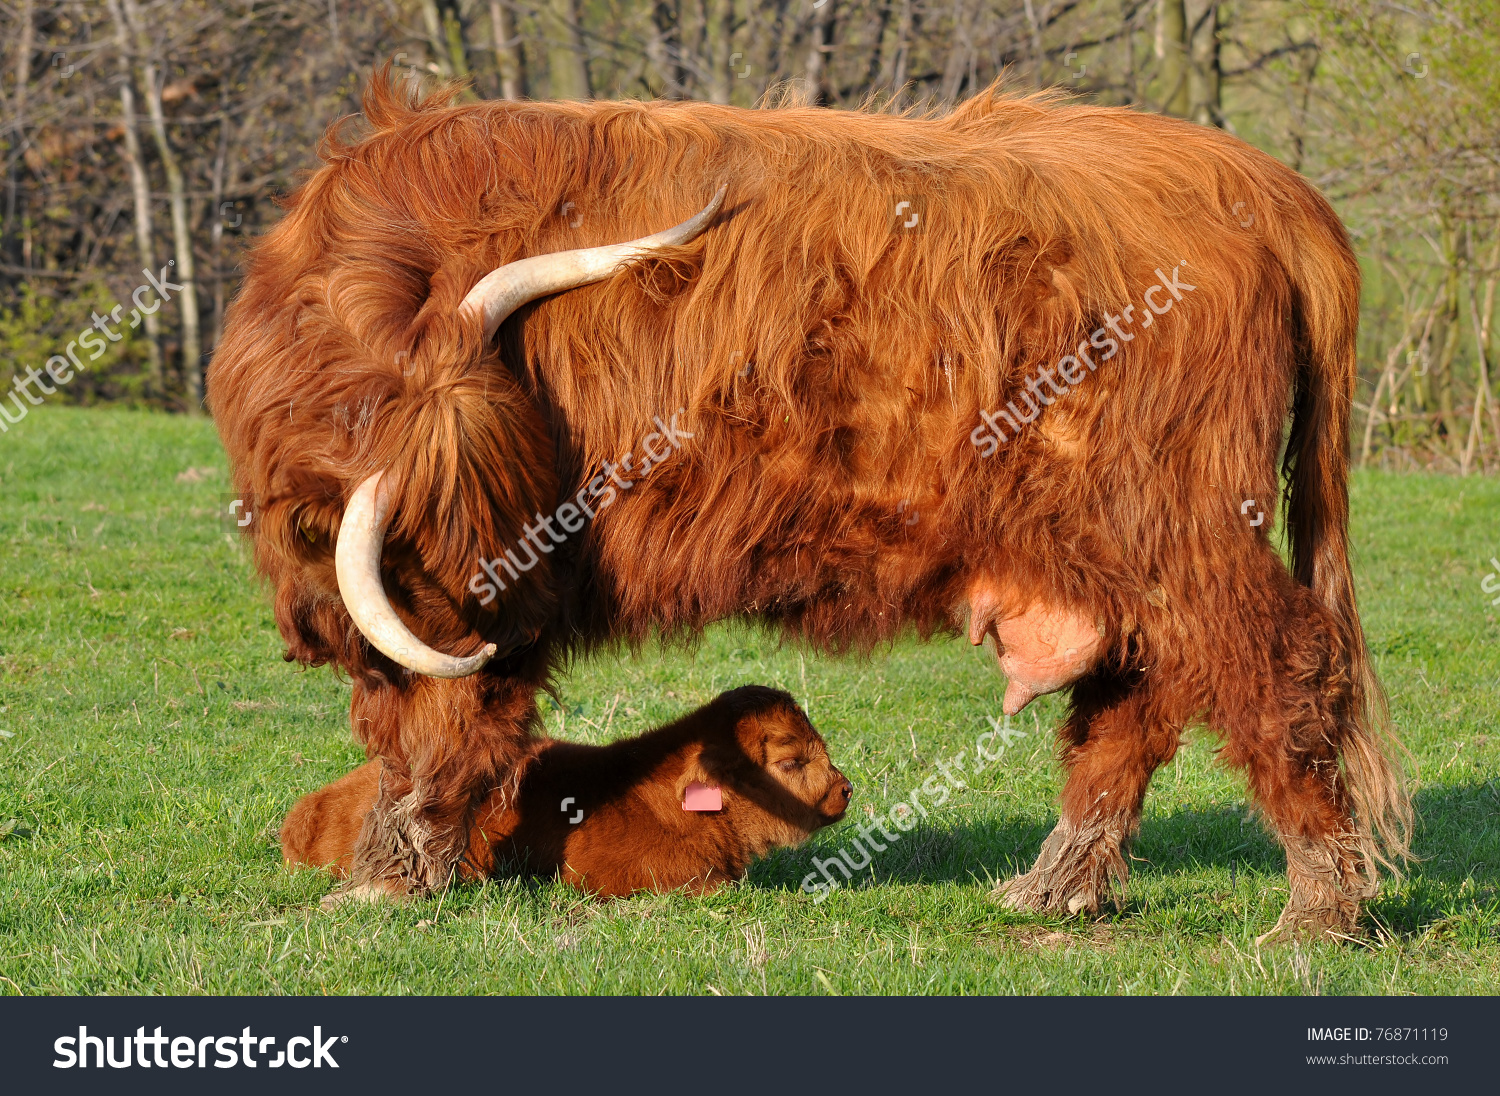 HQ Highland Cattle Wallpapers | File 1075.87Kb